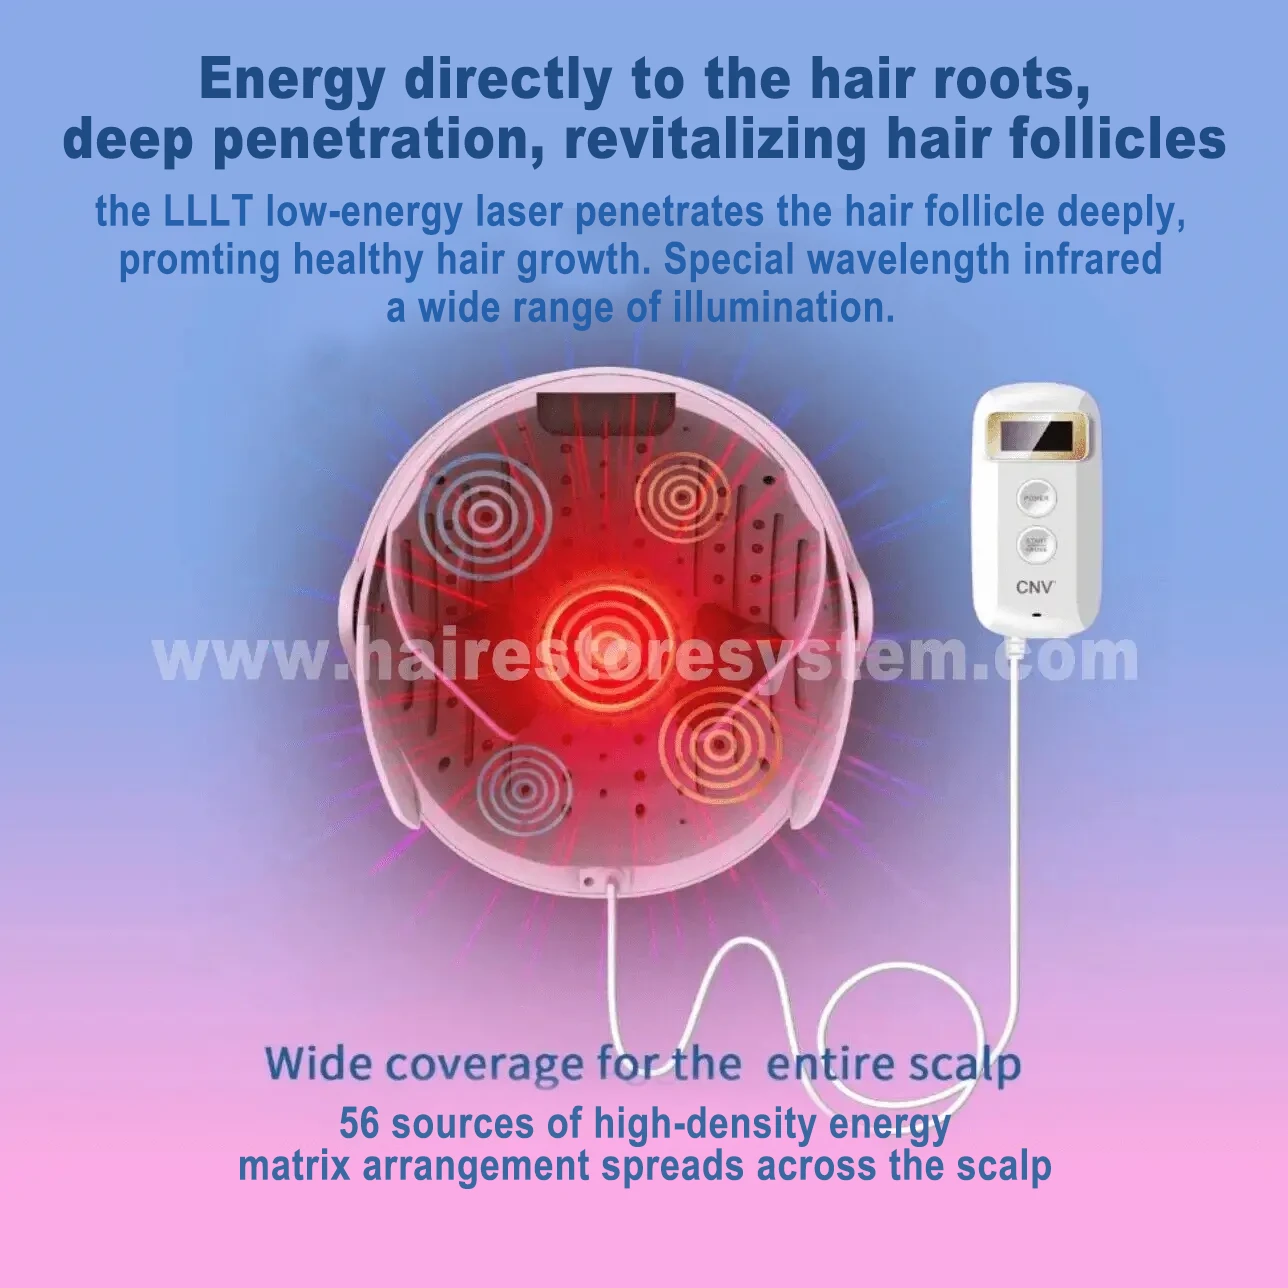 restore-hairg-rowth-system-15